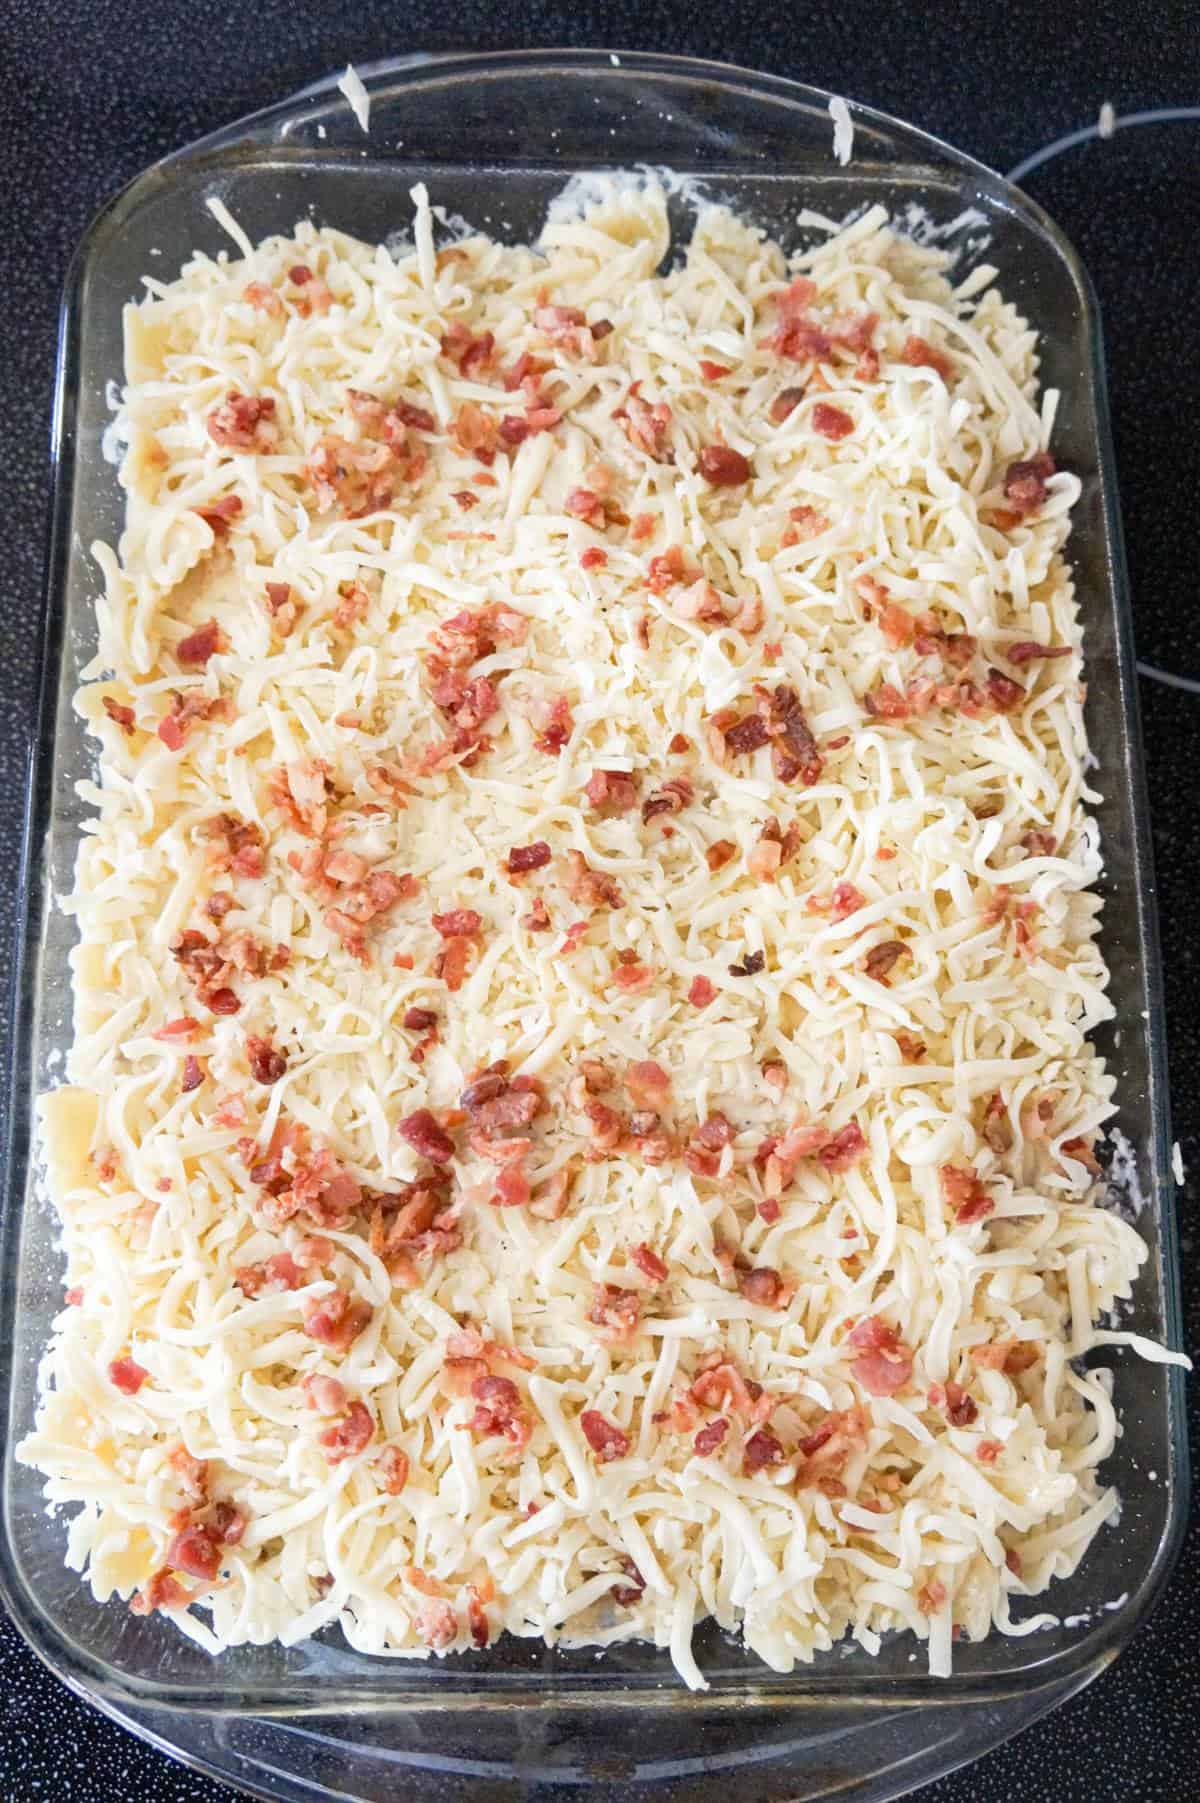 crumbled bacon and shredded mozzarella cheese on top of Alfredo pasta in a baking dish